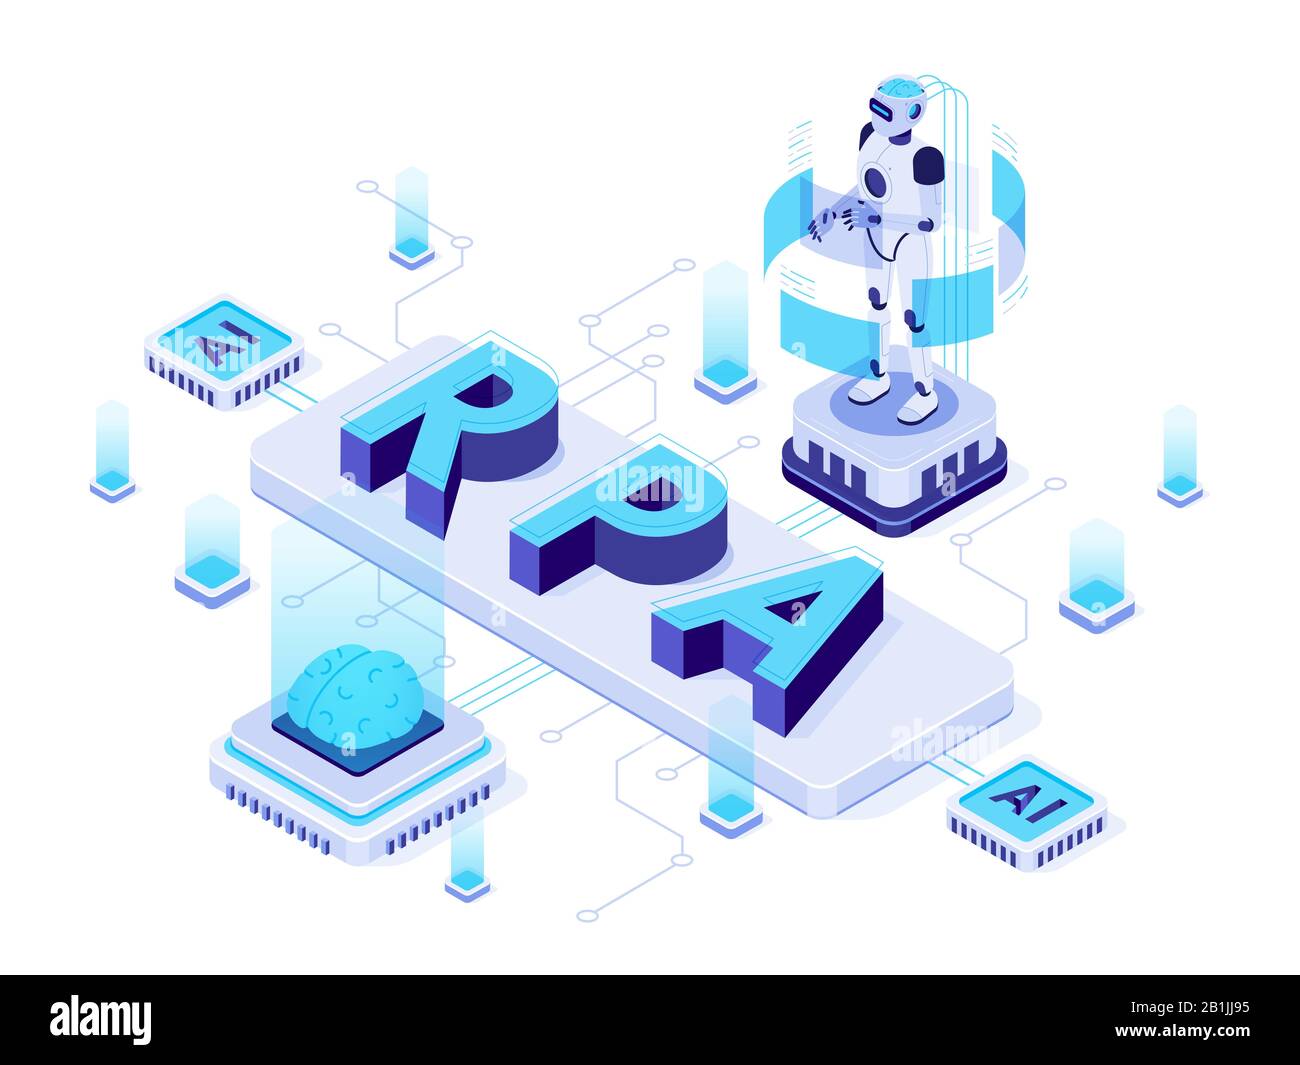 Isometric RPA. Robotic process automation, futuristic artificial intelligence robots and AI learning vector illustration Stock Vector